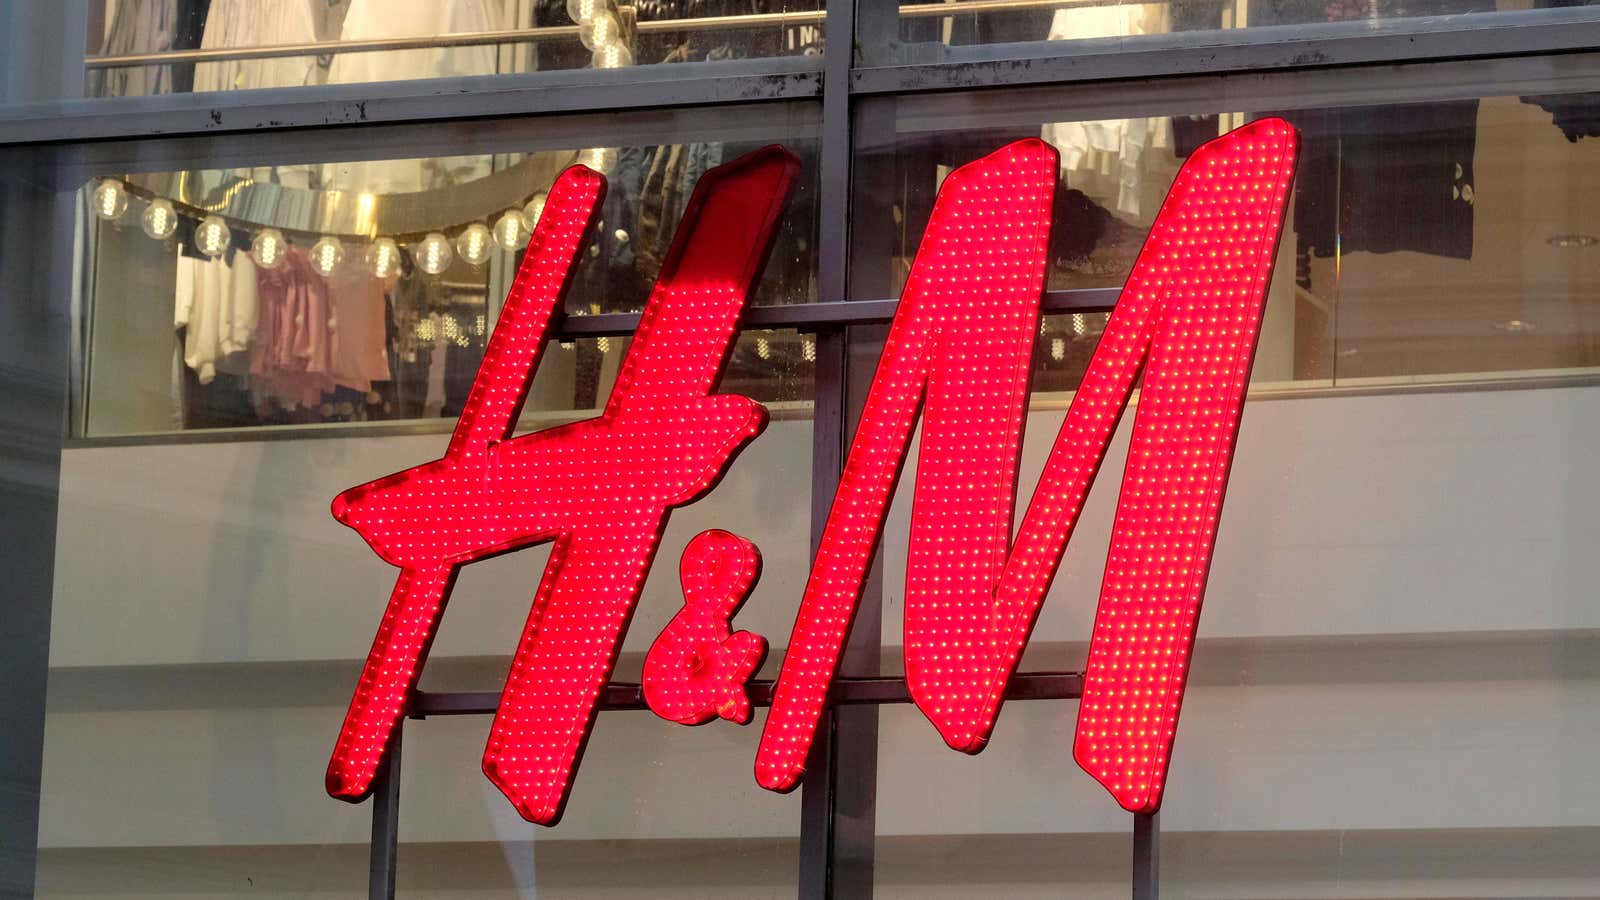 H&M’s latest statement on Xinjiang cotton is very careful not to mention Xinjiang